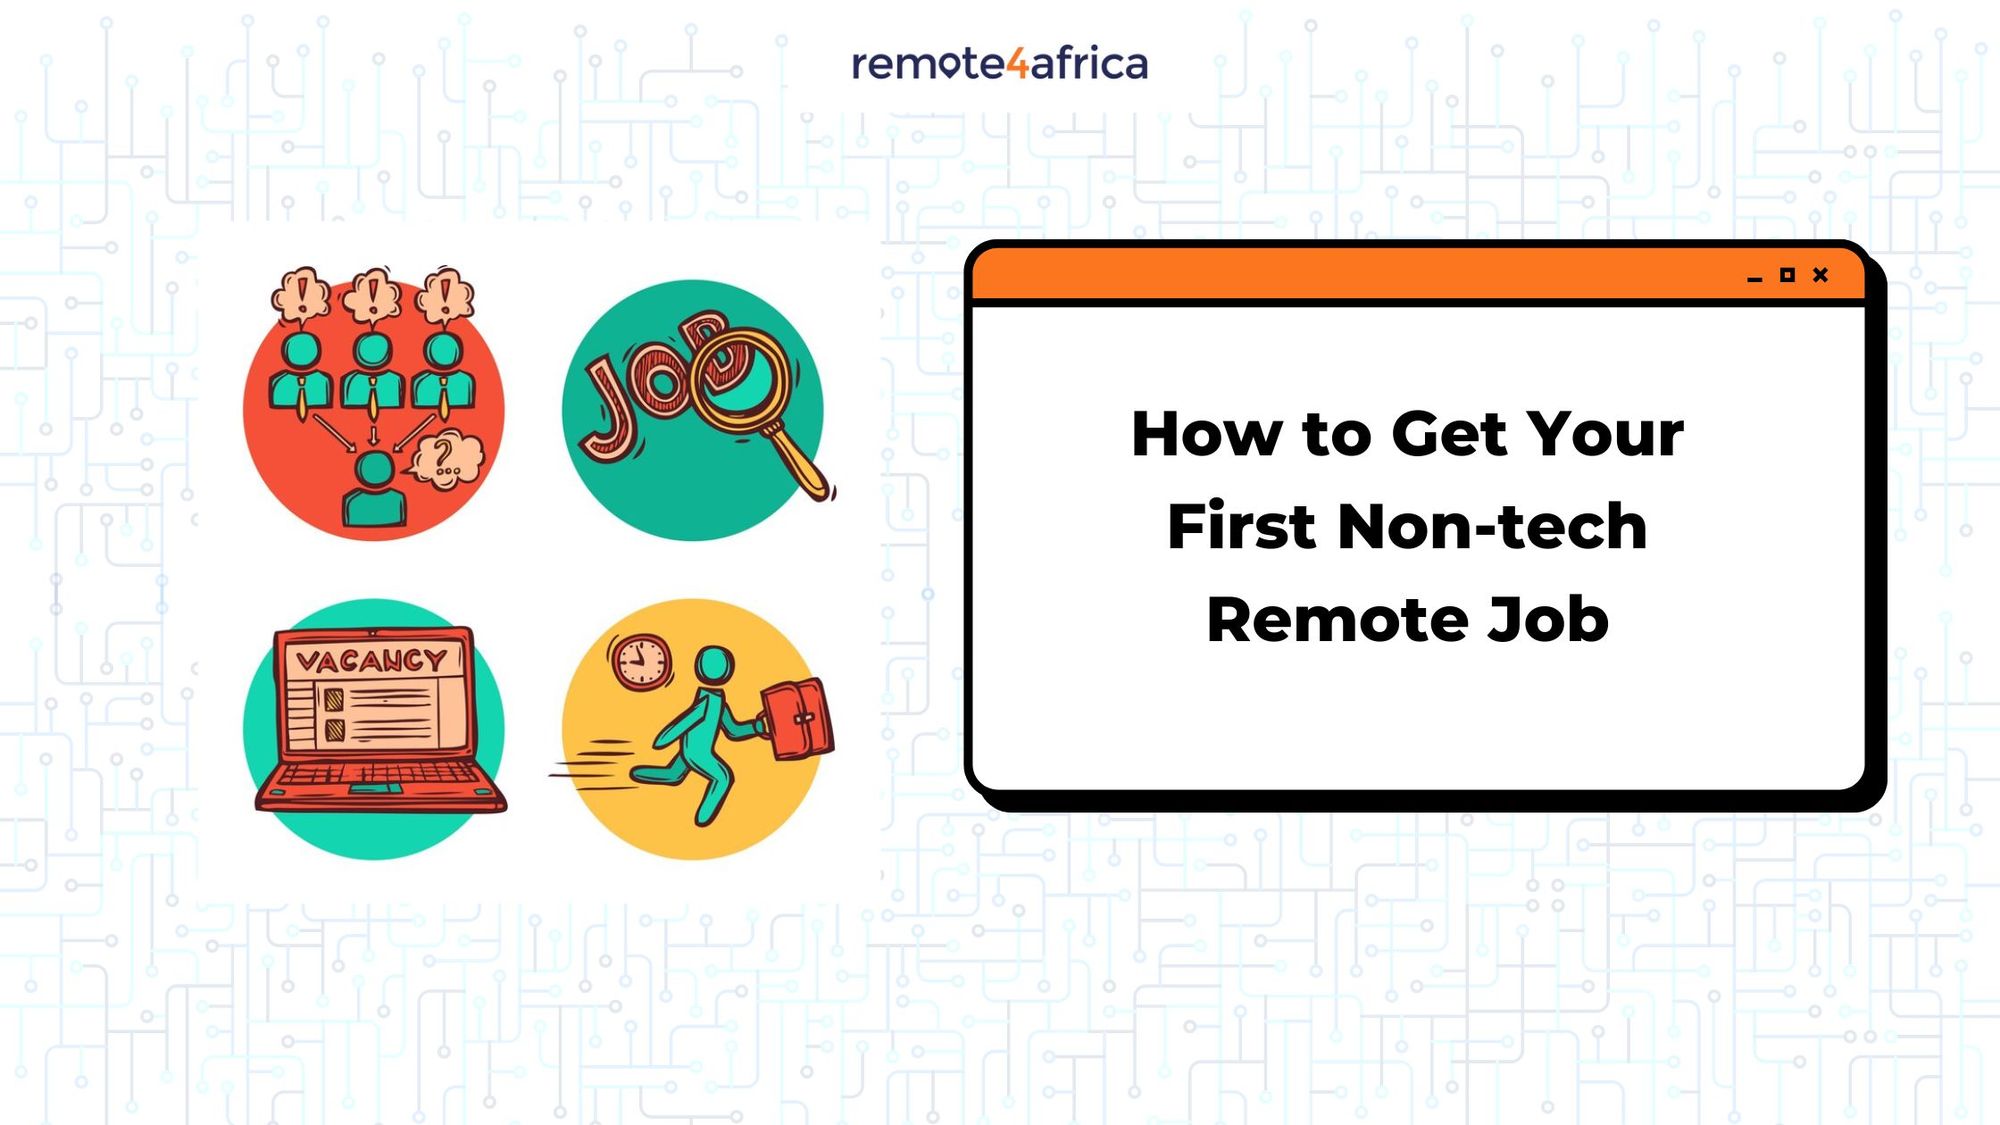 How to Get Your First Non-tech Remote Job